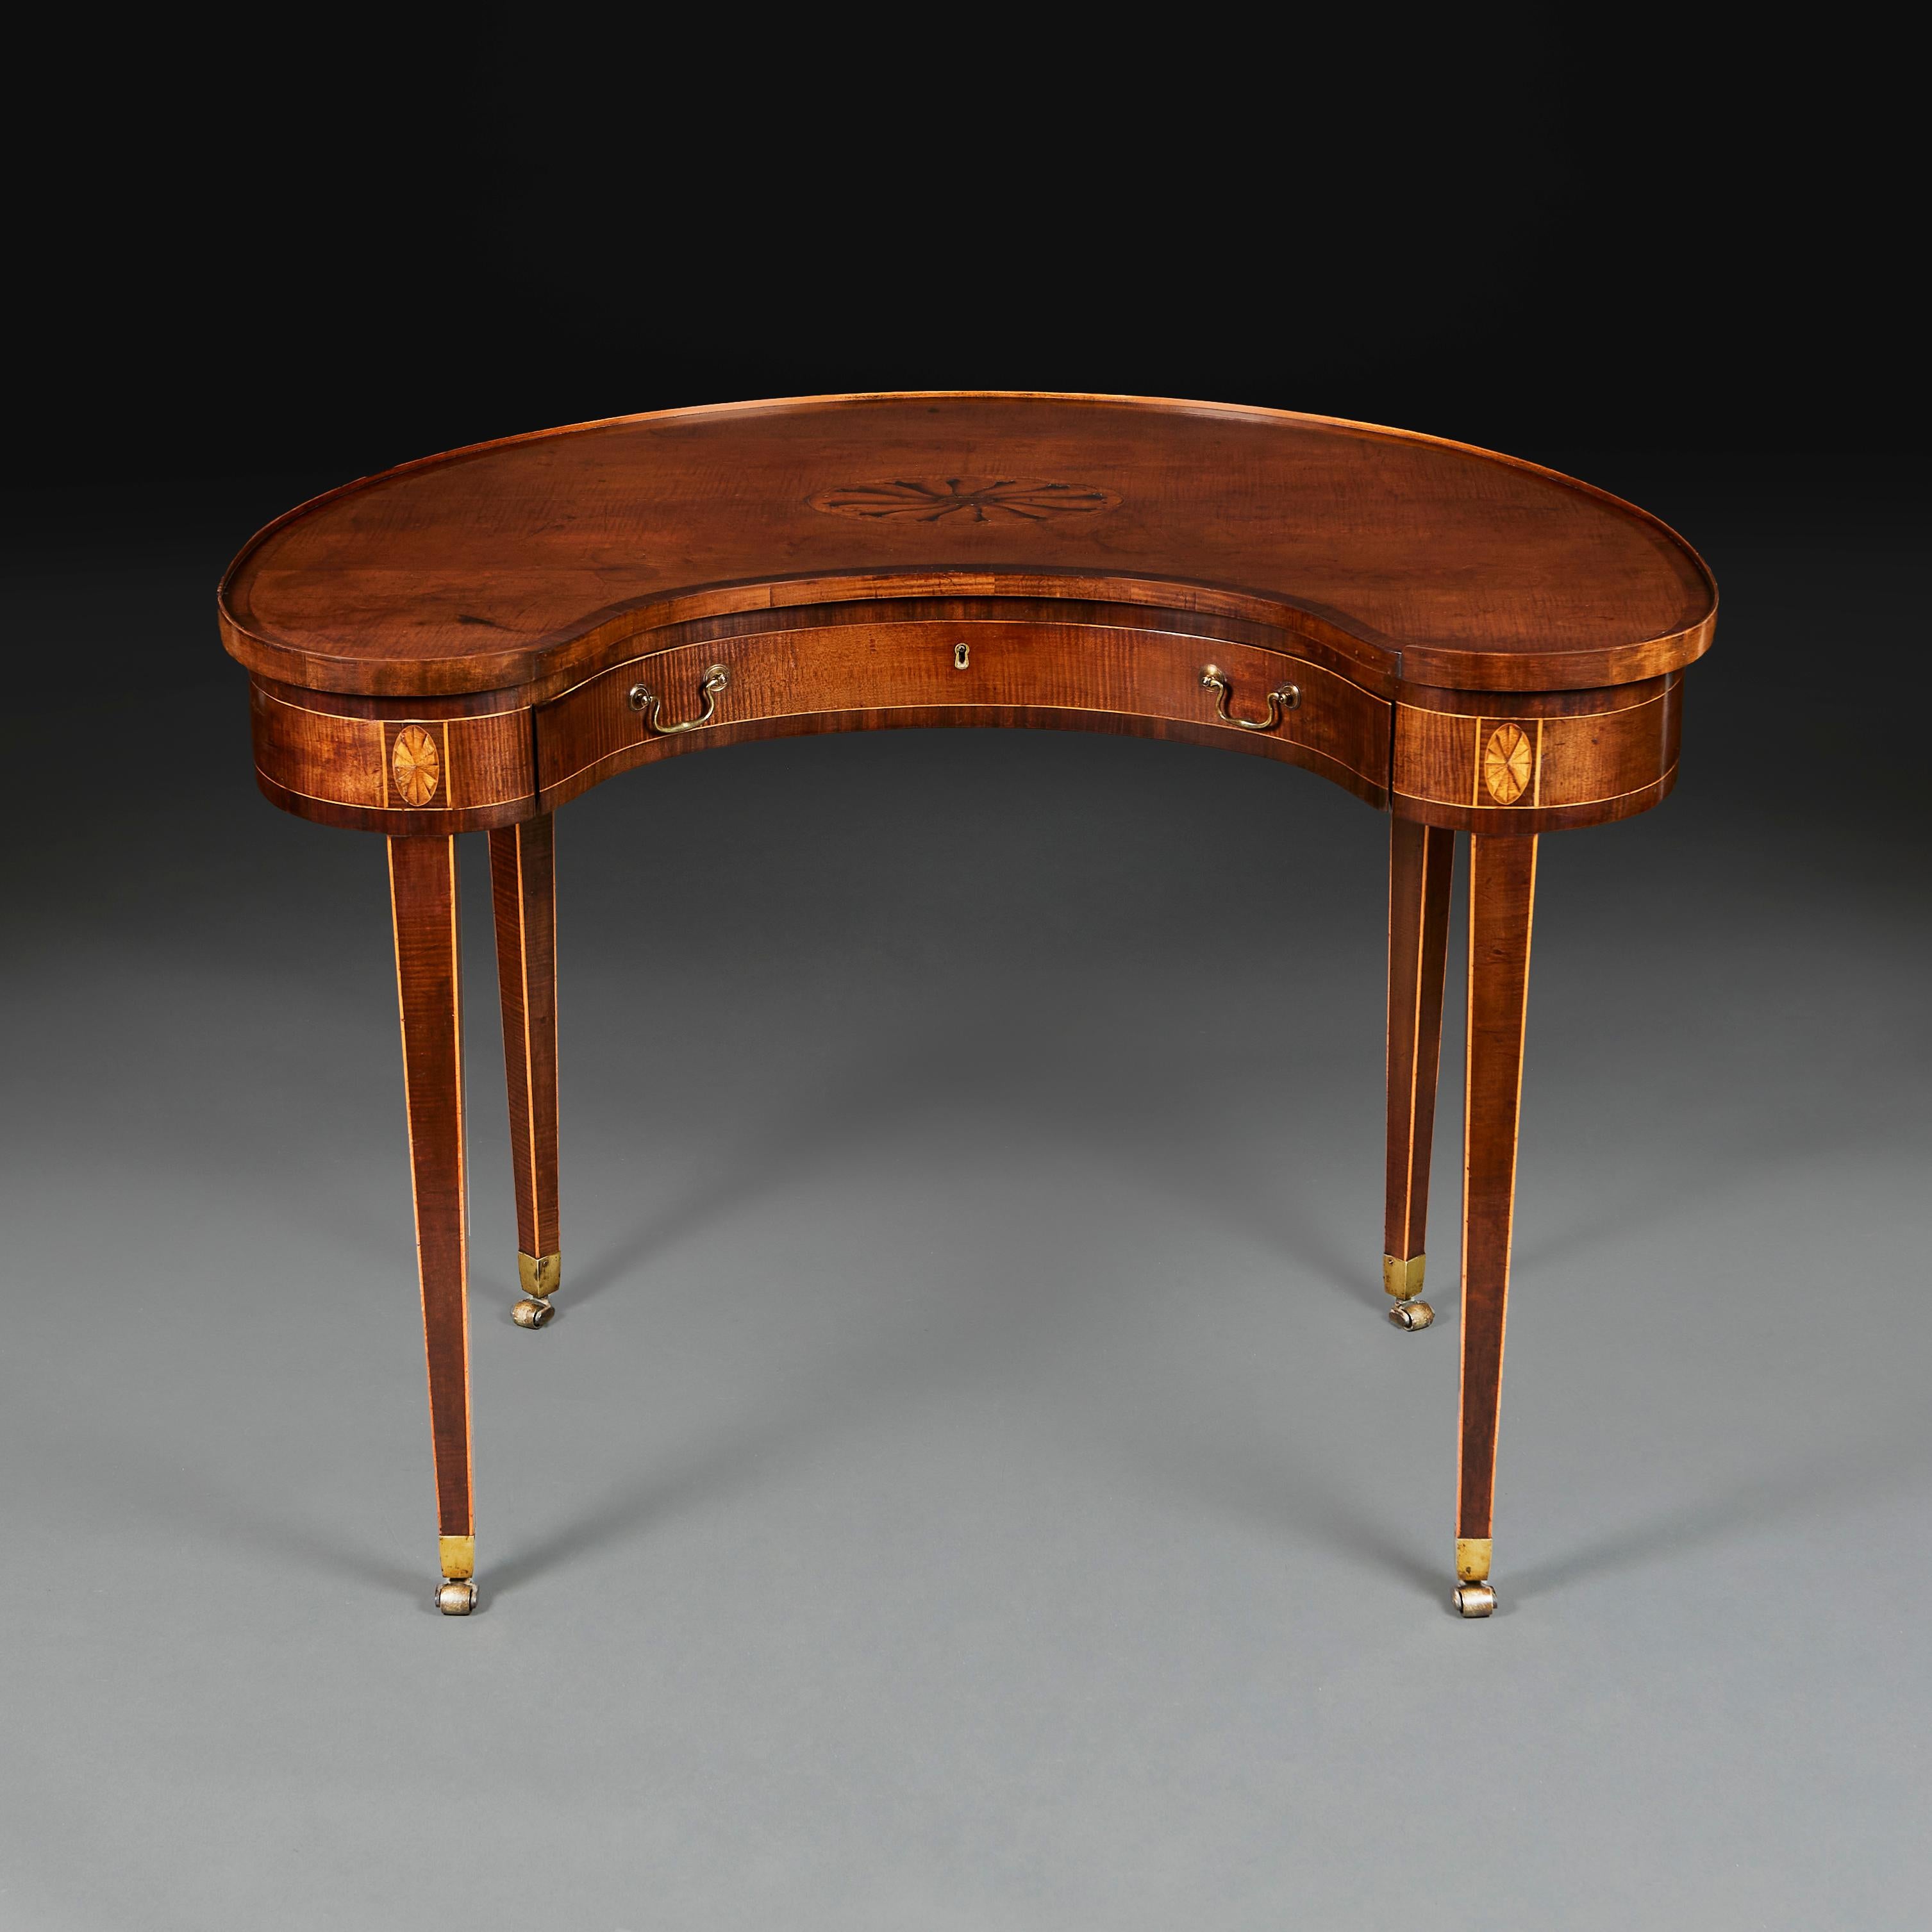 Mahogany An Early 19th Century English Kidney Shape Writing Table or Desk